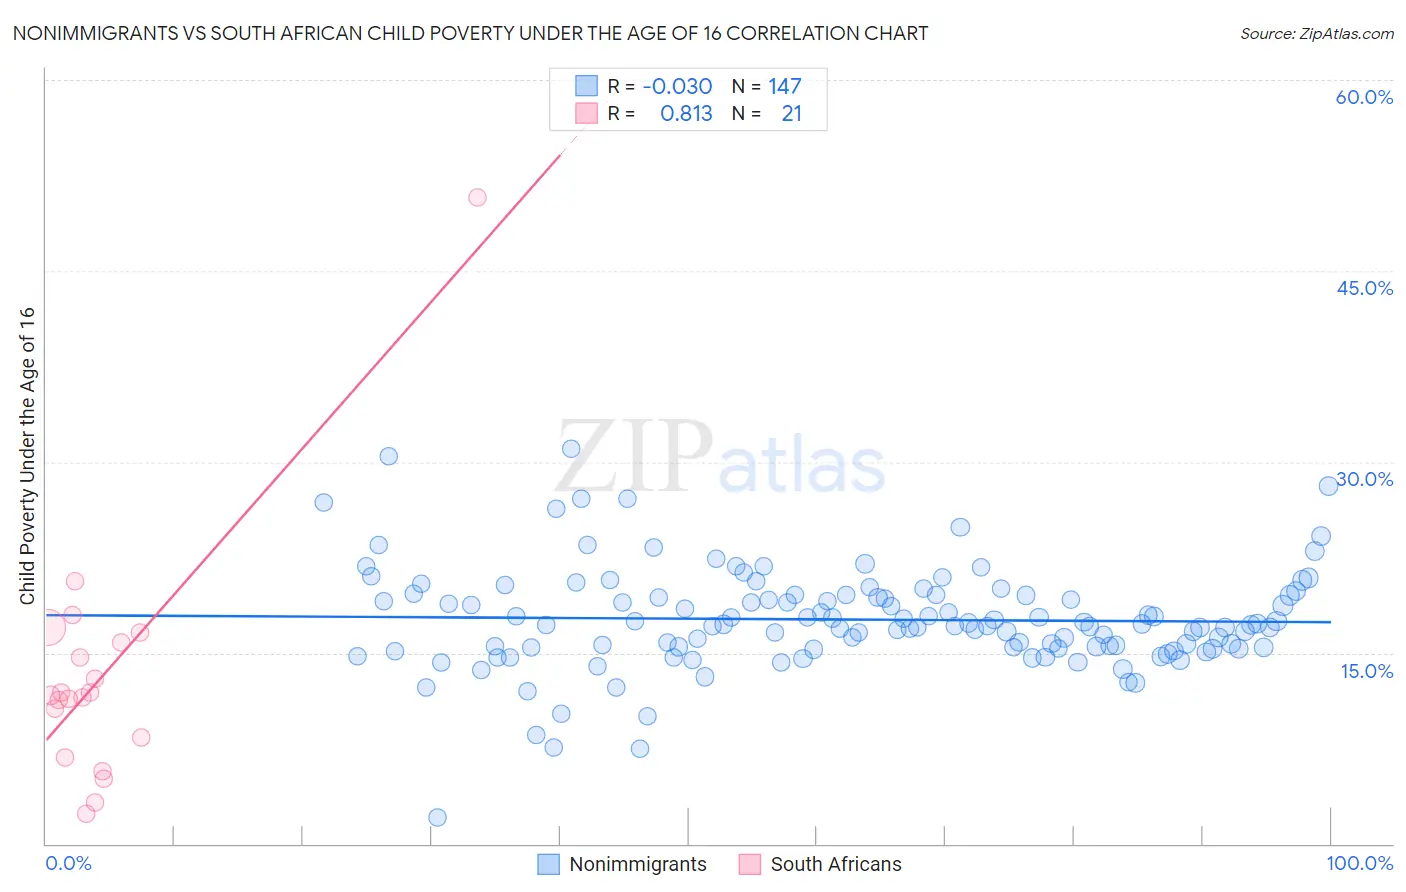 Nonimmigrants vs South African Child Poverty Under the Age of 16